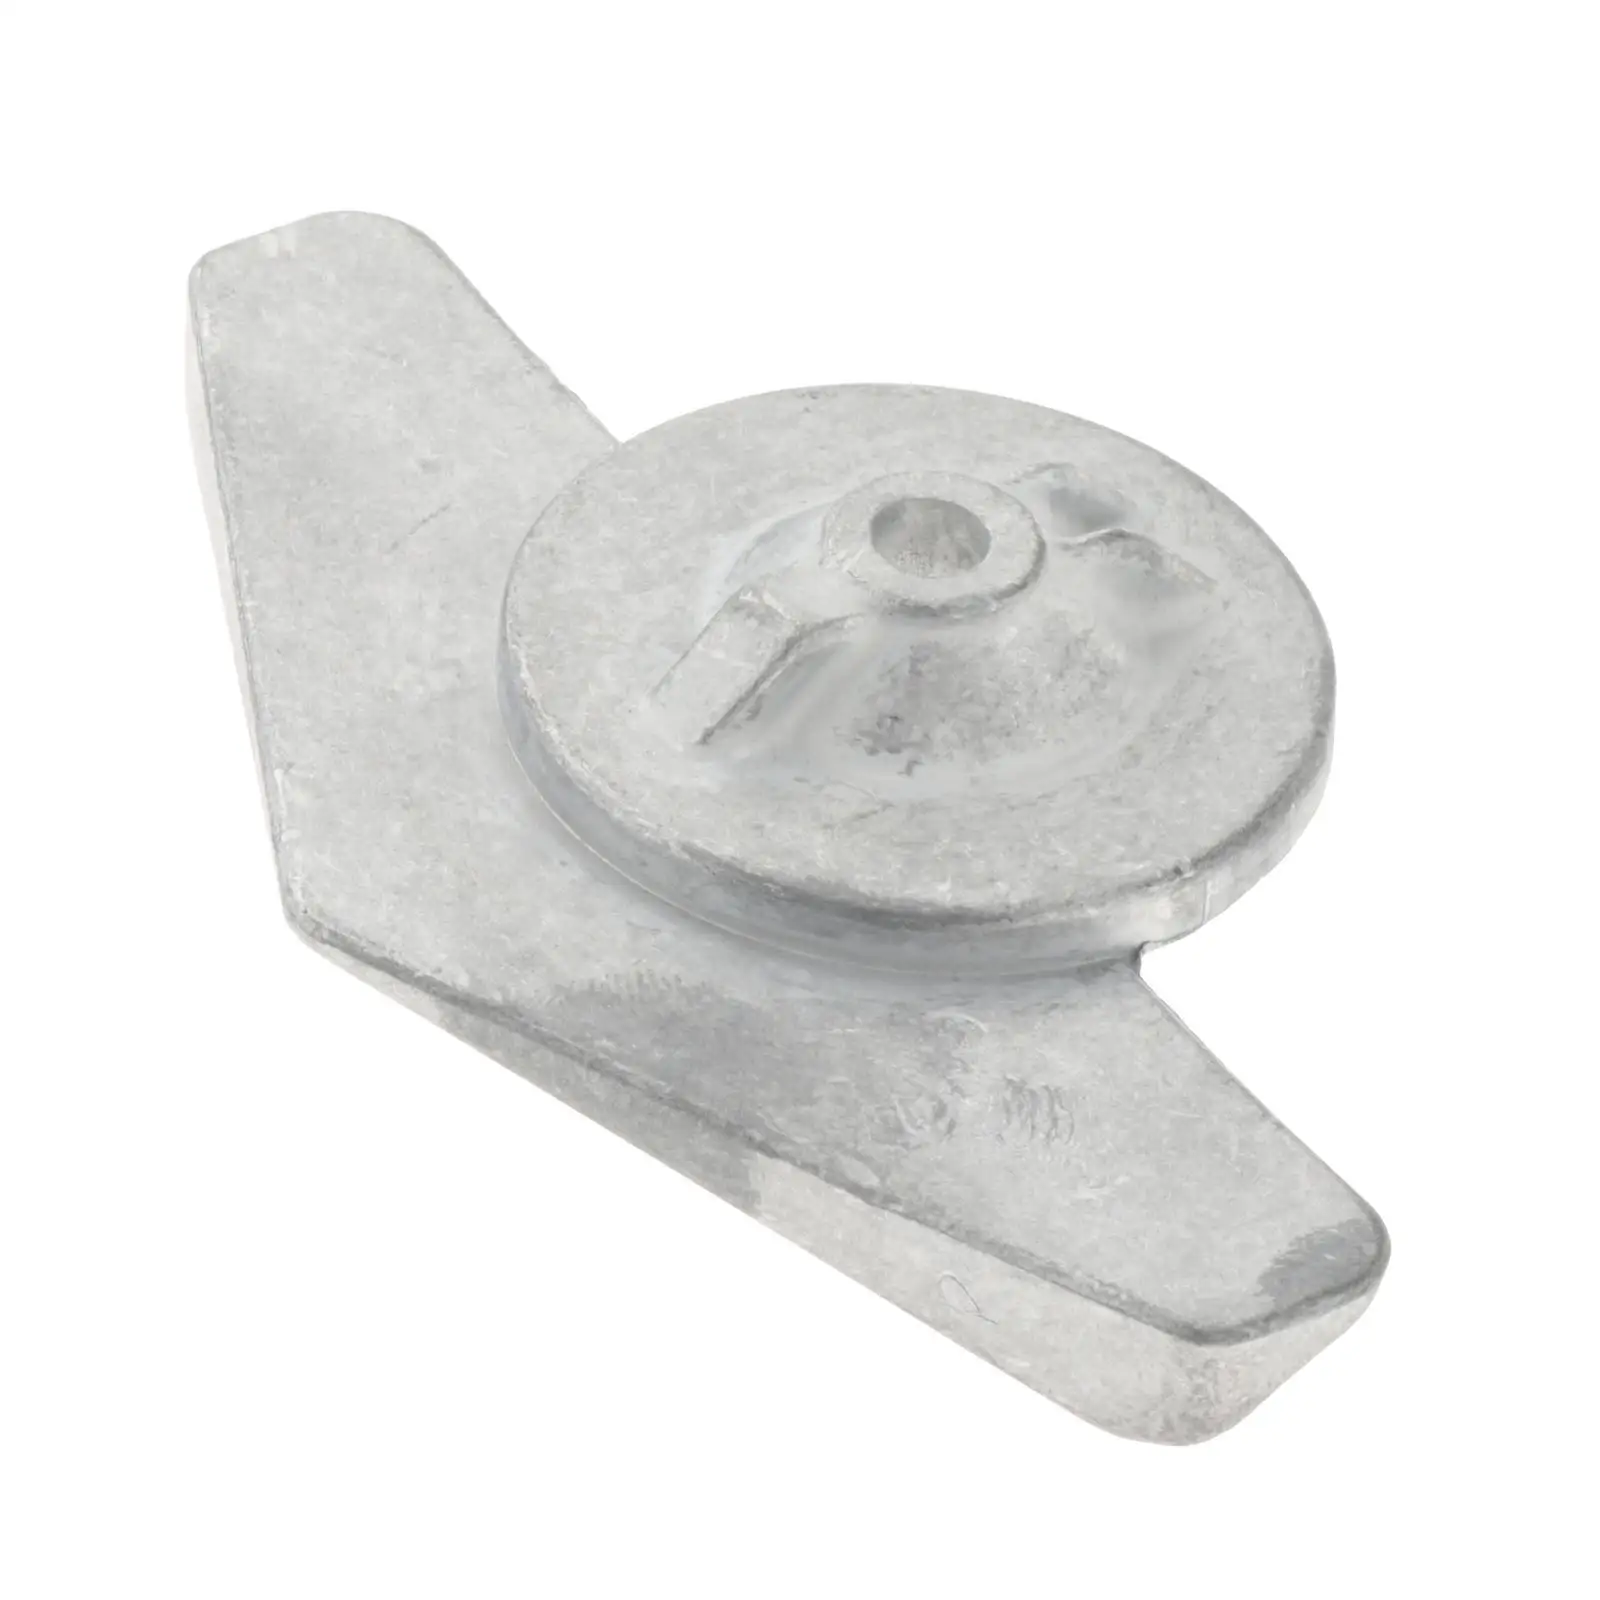 Anode Fits for Yamaha Outboard Motor F9.9 F15 15HP 2 Stroke & 4 Stroke Accessories Spare Parts 6E8-45251-02 Replacement